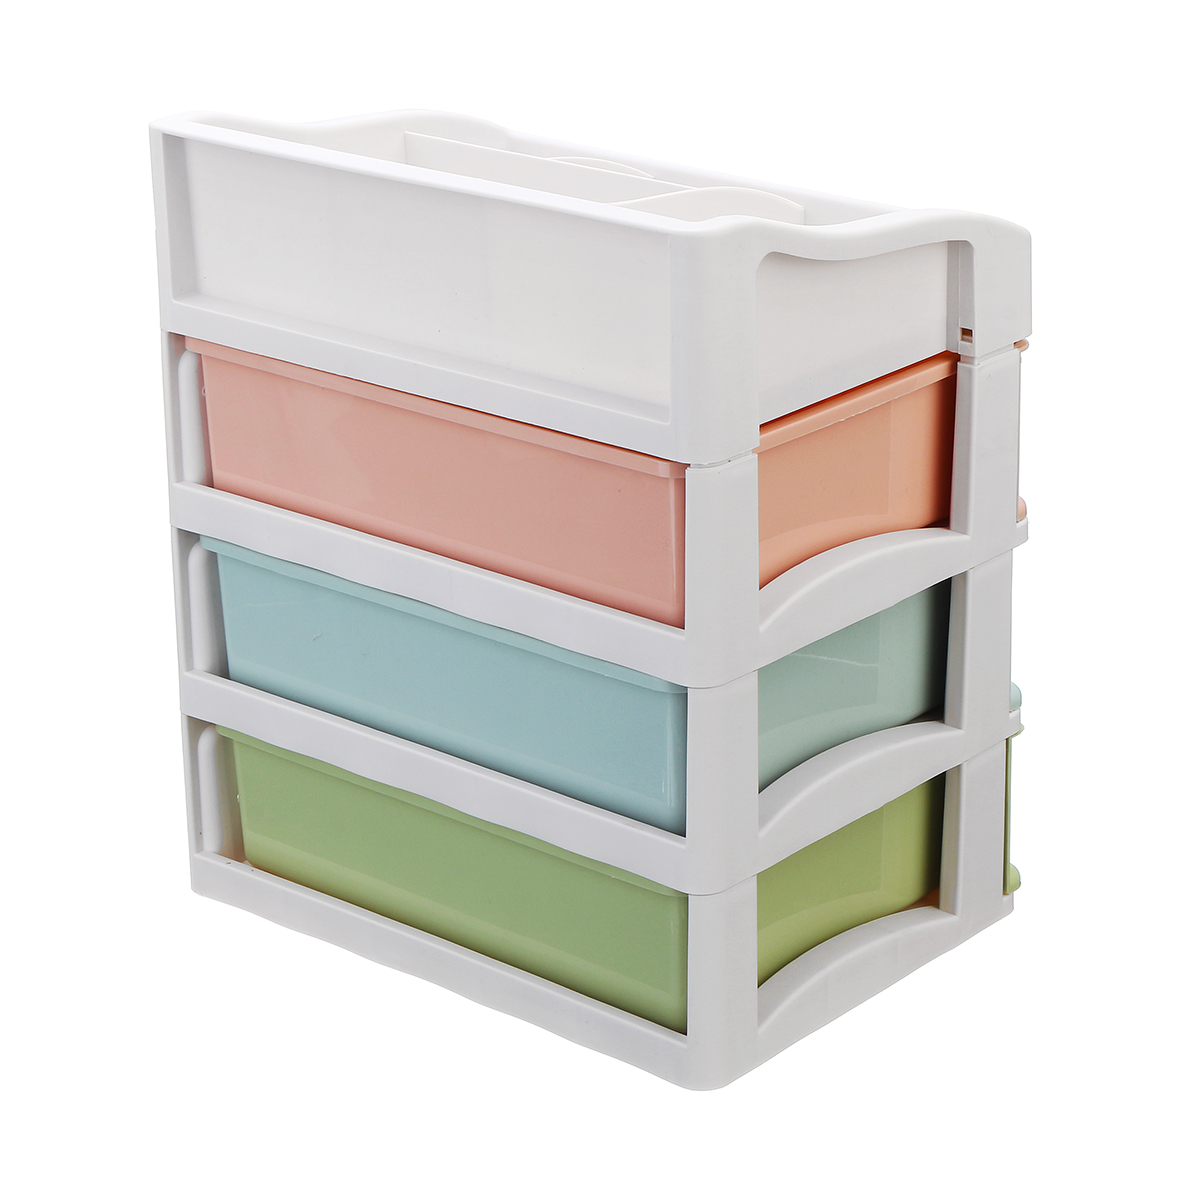 Plastic-Makeup-Holder-Box-Storage-Desktop-Container-Cosmetic--Jewelry-Container-Table-Organizer-1563970-5